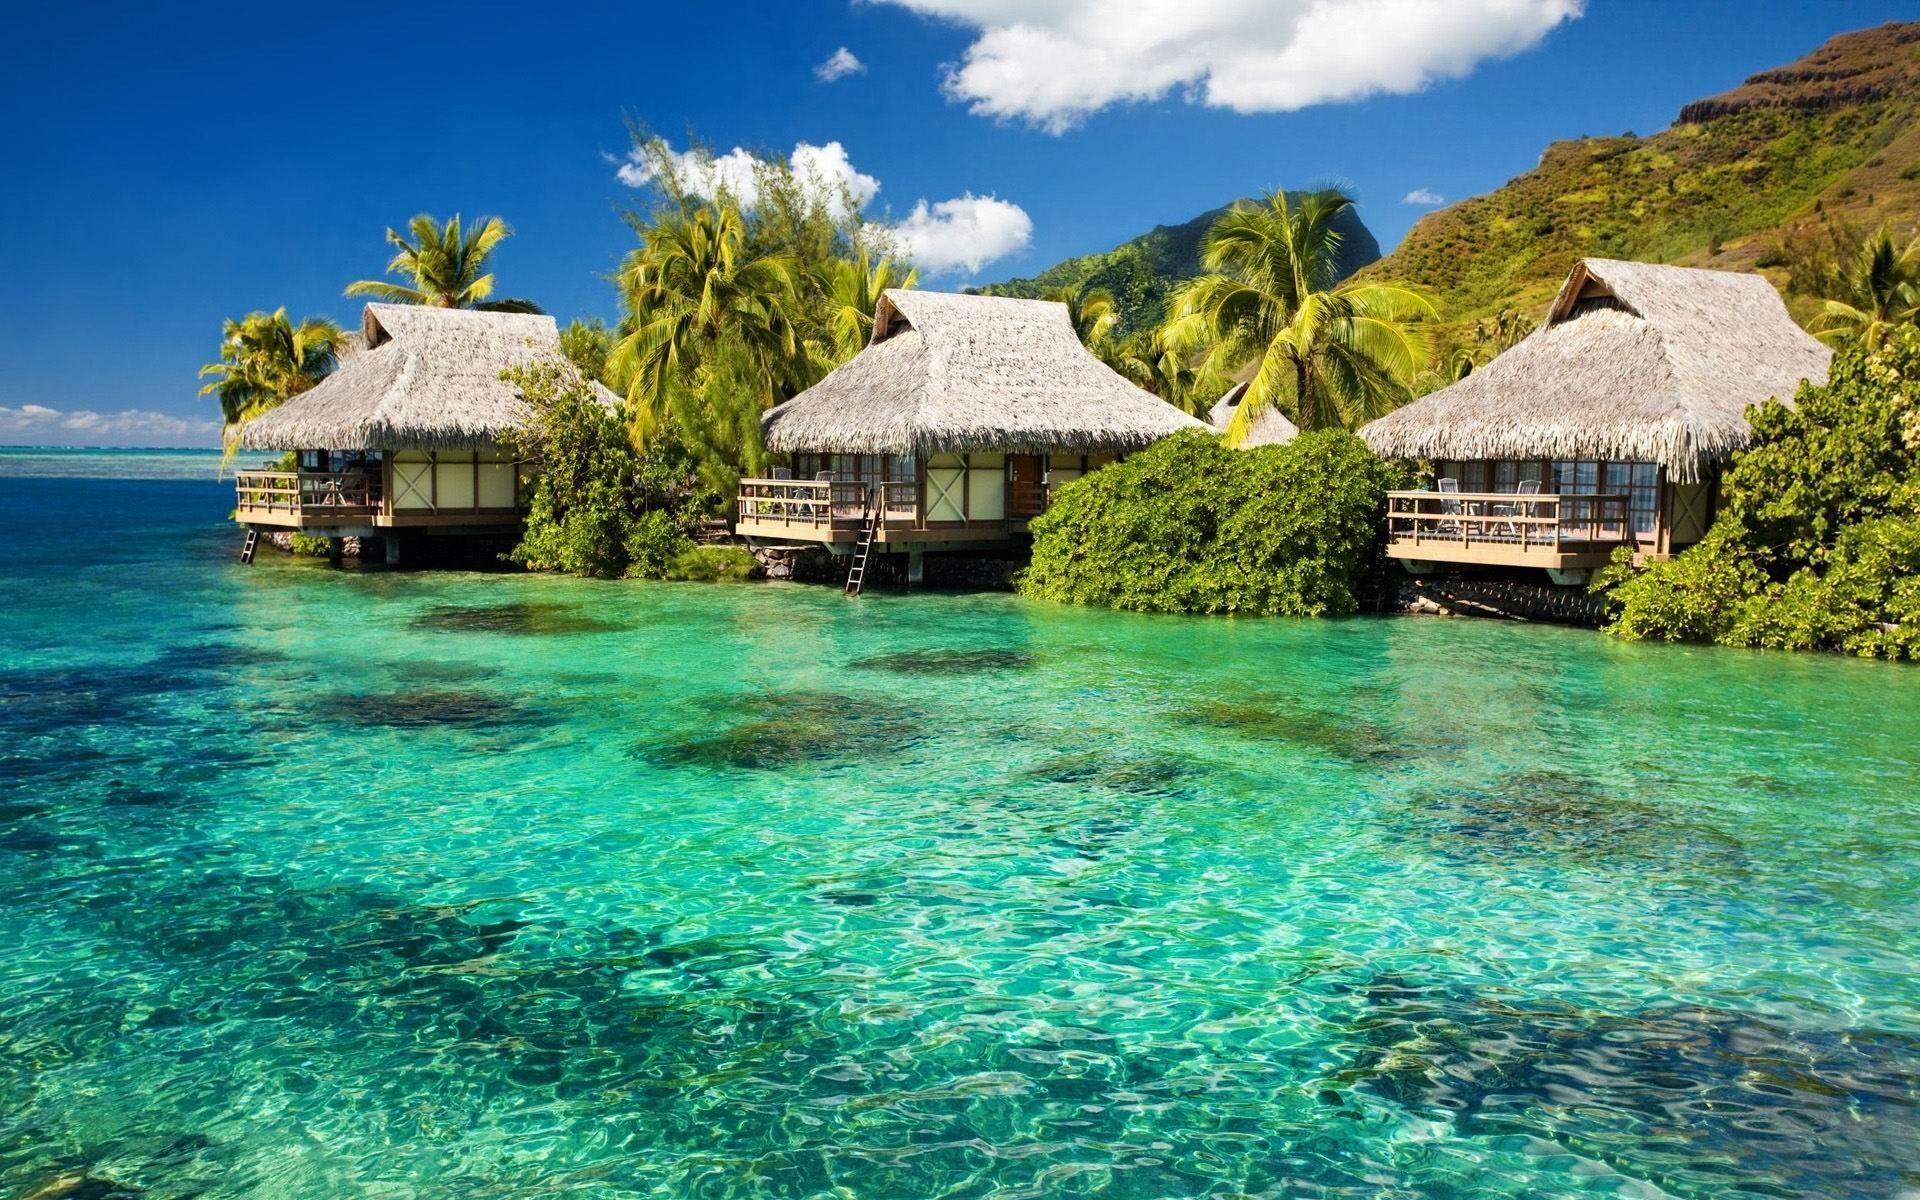 Water Bungalows On A Tropical Island Island Travel Landscape